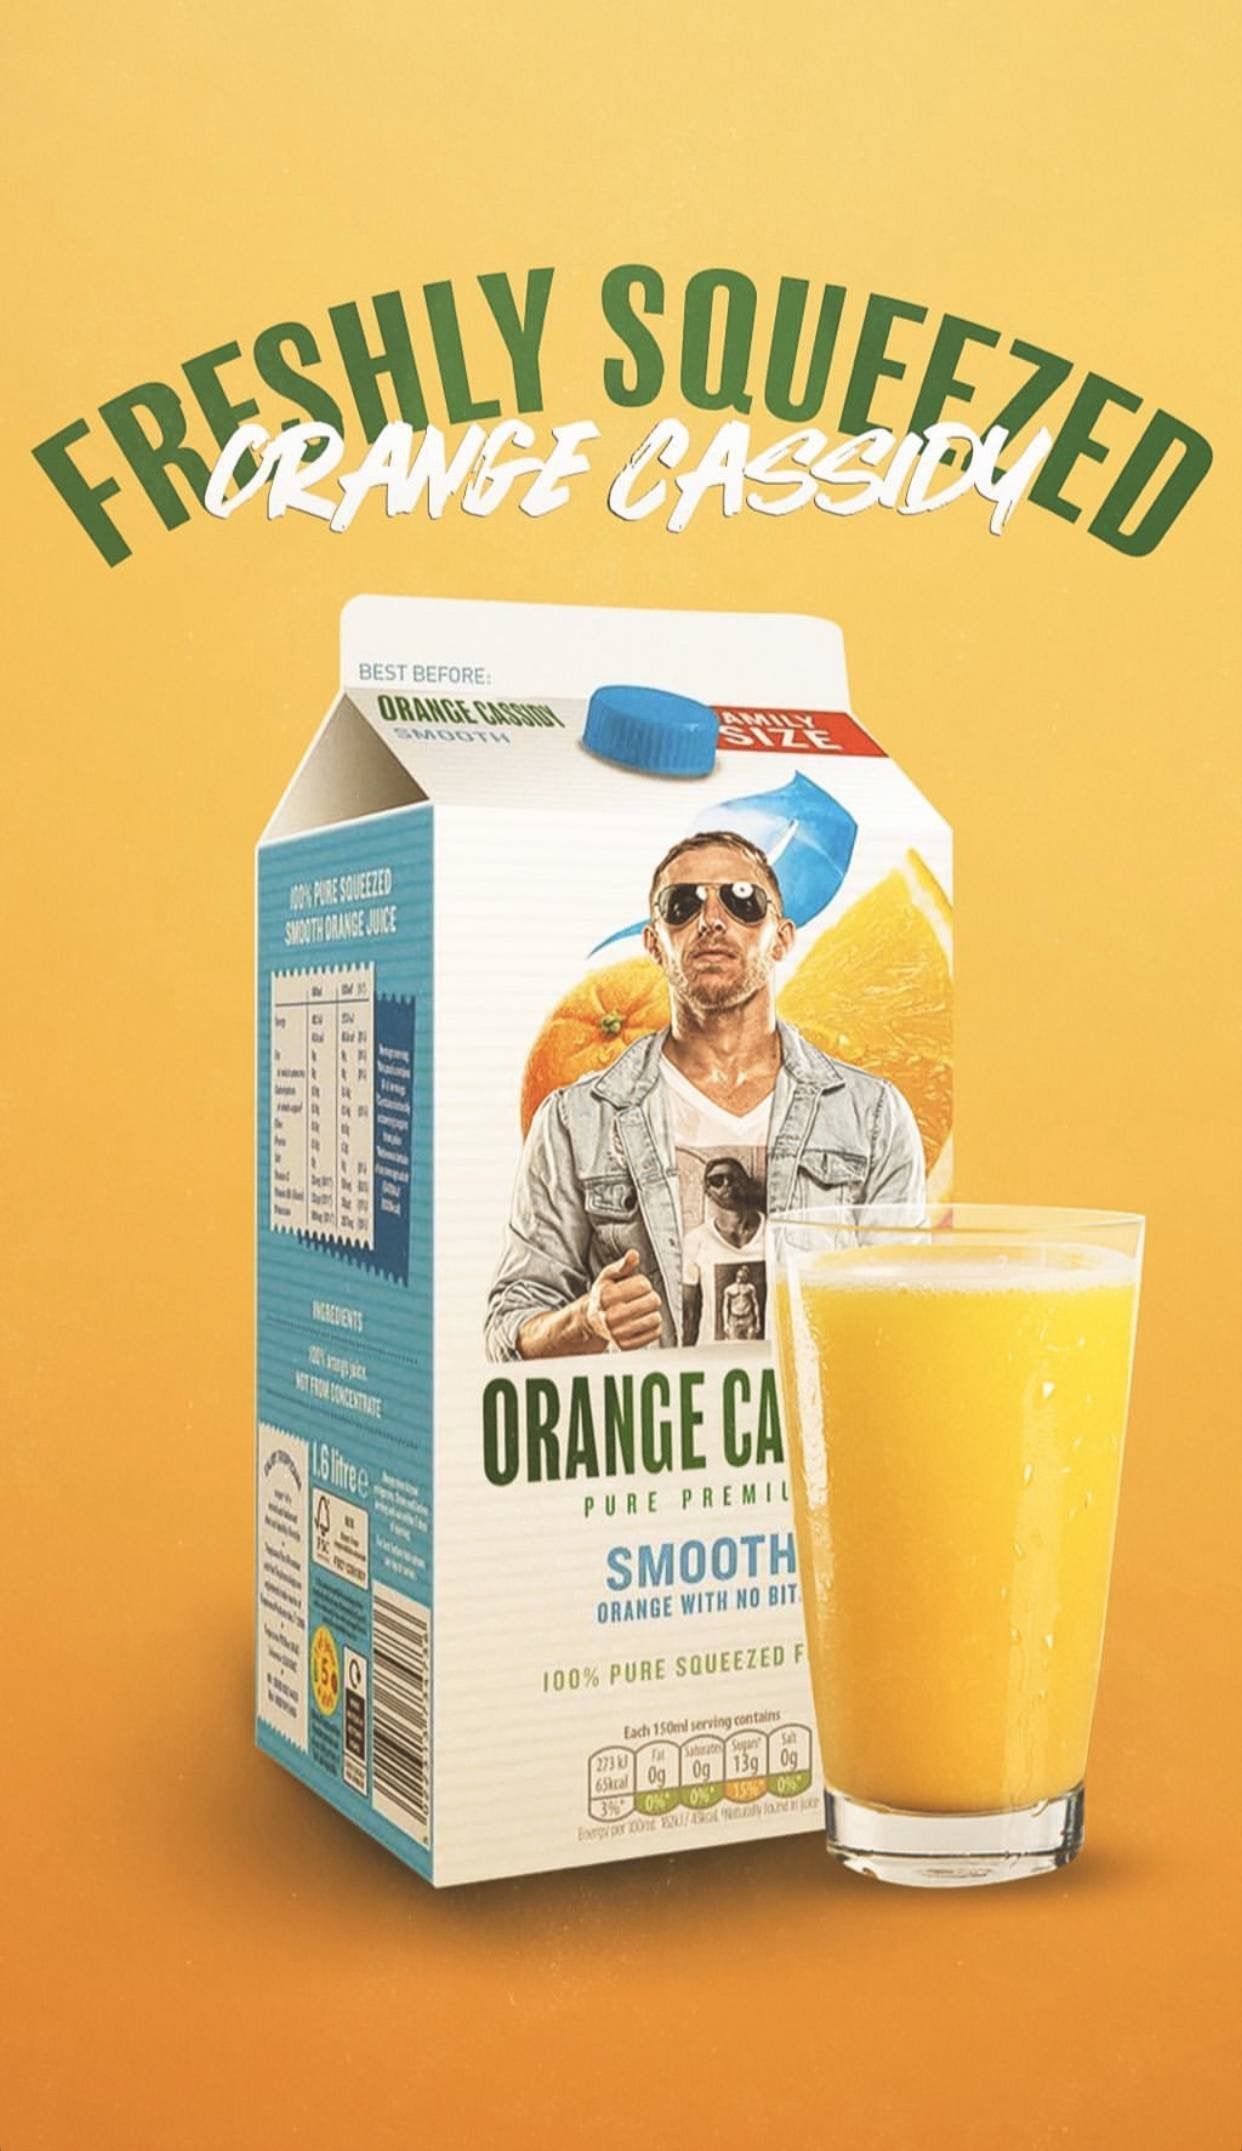 Here's a nice Orange Cassidy mobile wallpaper I found on Instagram